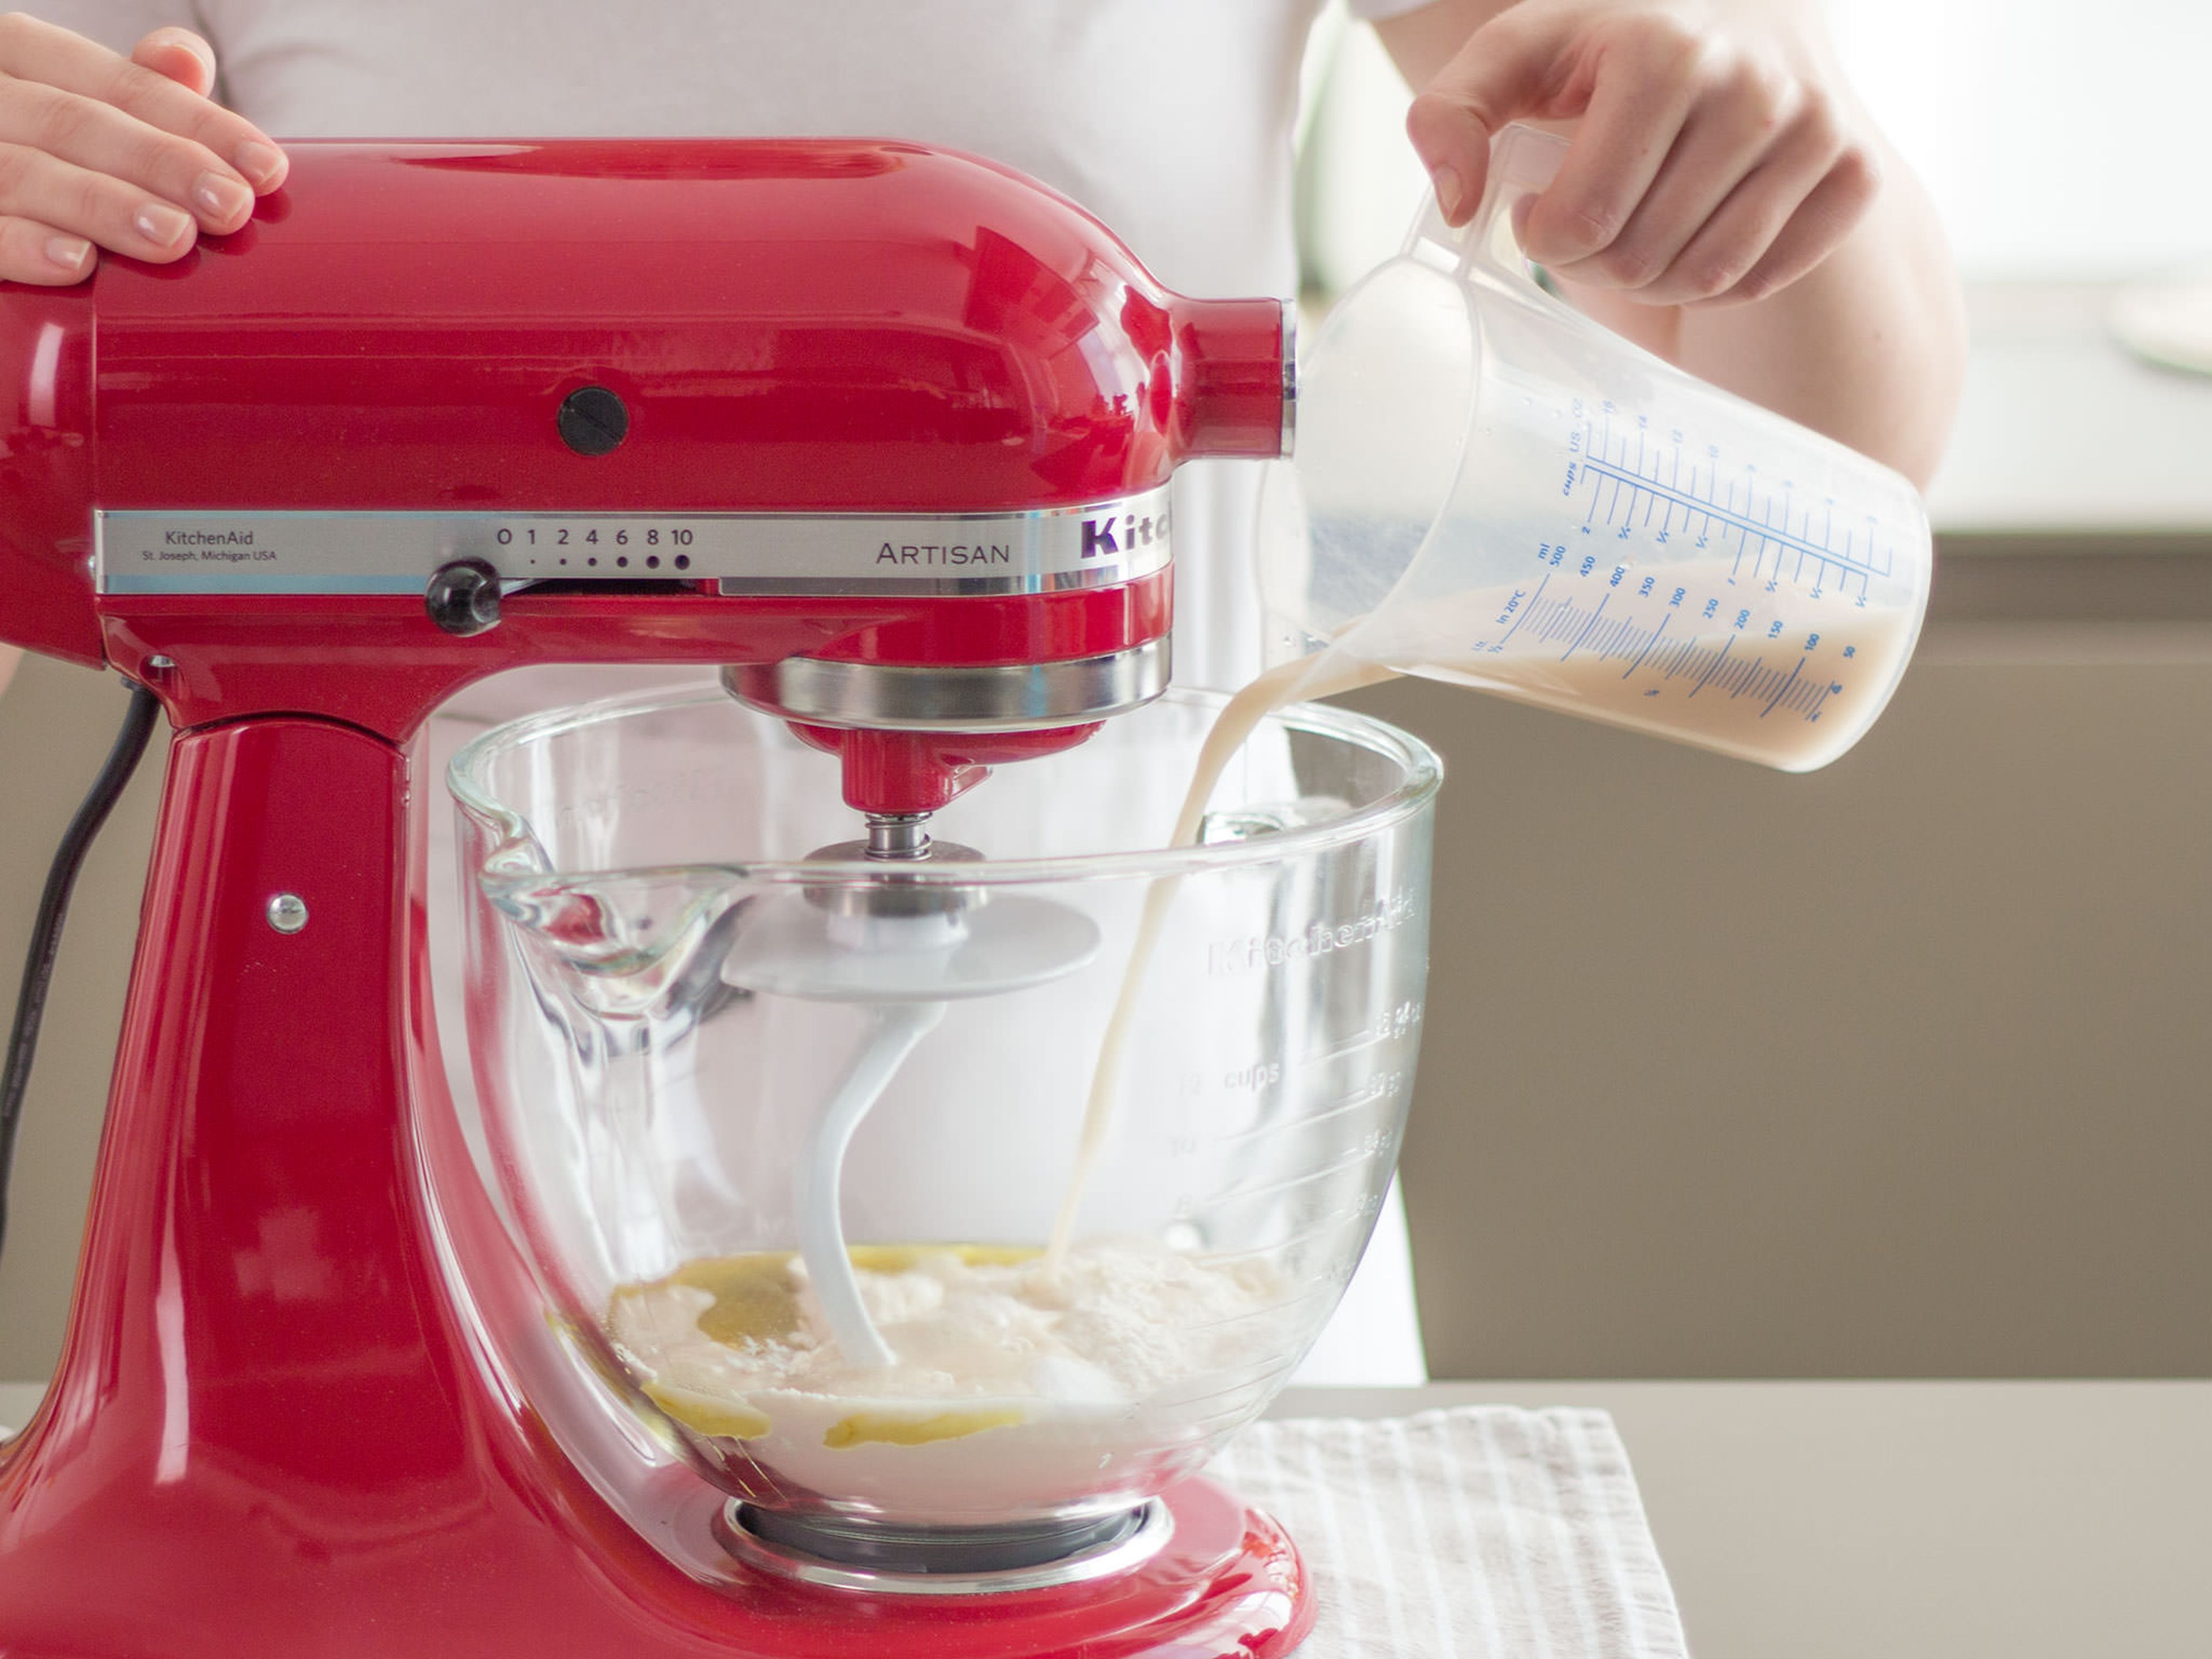 Dissolve yeast and sugar in lukewarm water and let sit for approx. 15 to 20 minutes, or until mixture is foamy. Sift flour into standing mixer. Pour yeast and sugar into standing mixer.